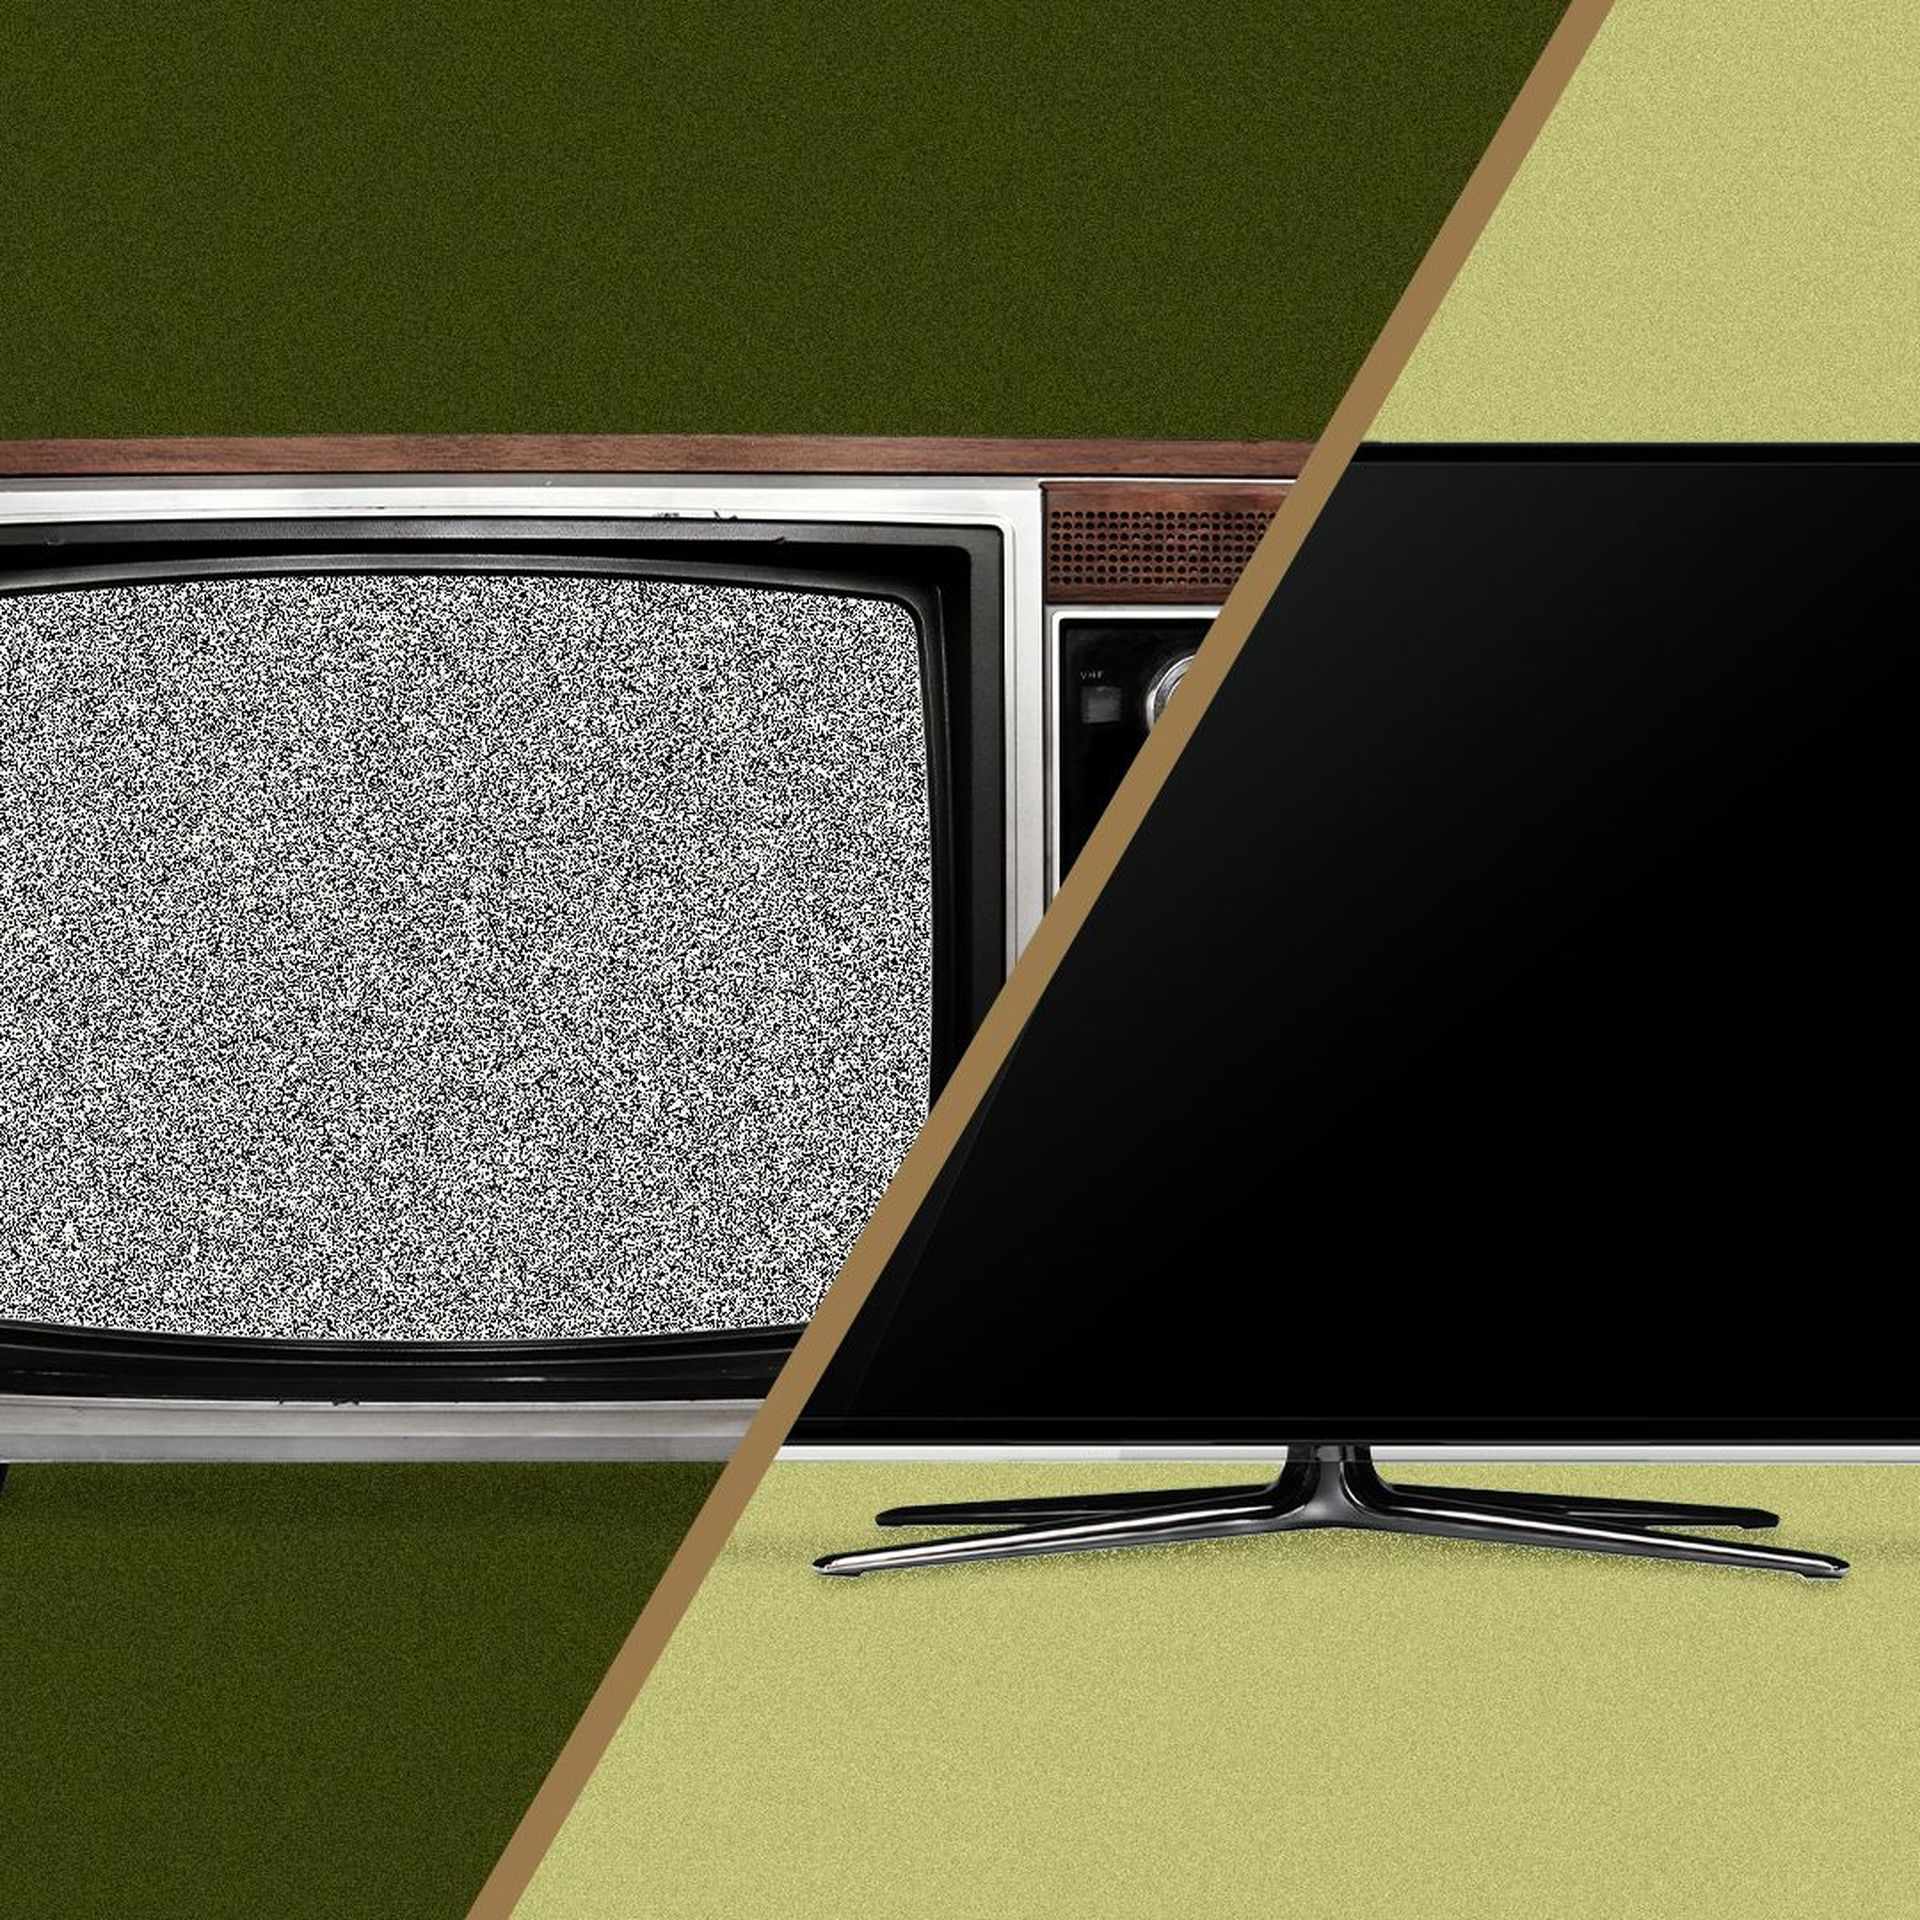 Streaming TV May Not Be the Cable Replacement You Hoped For